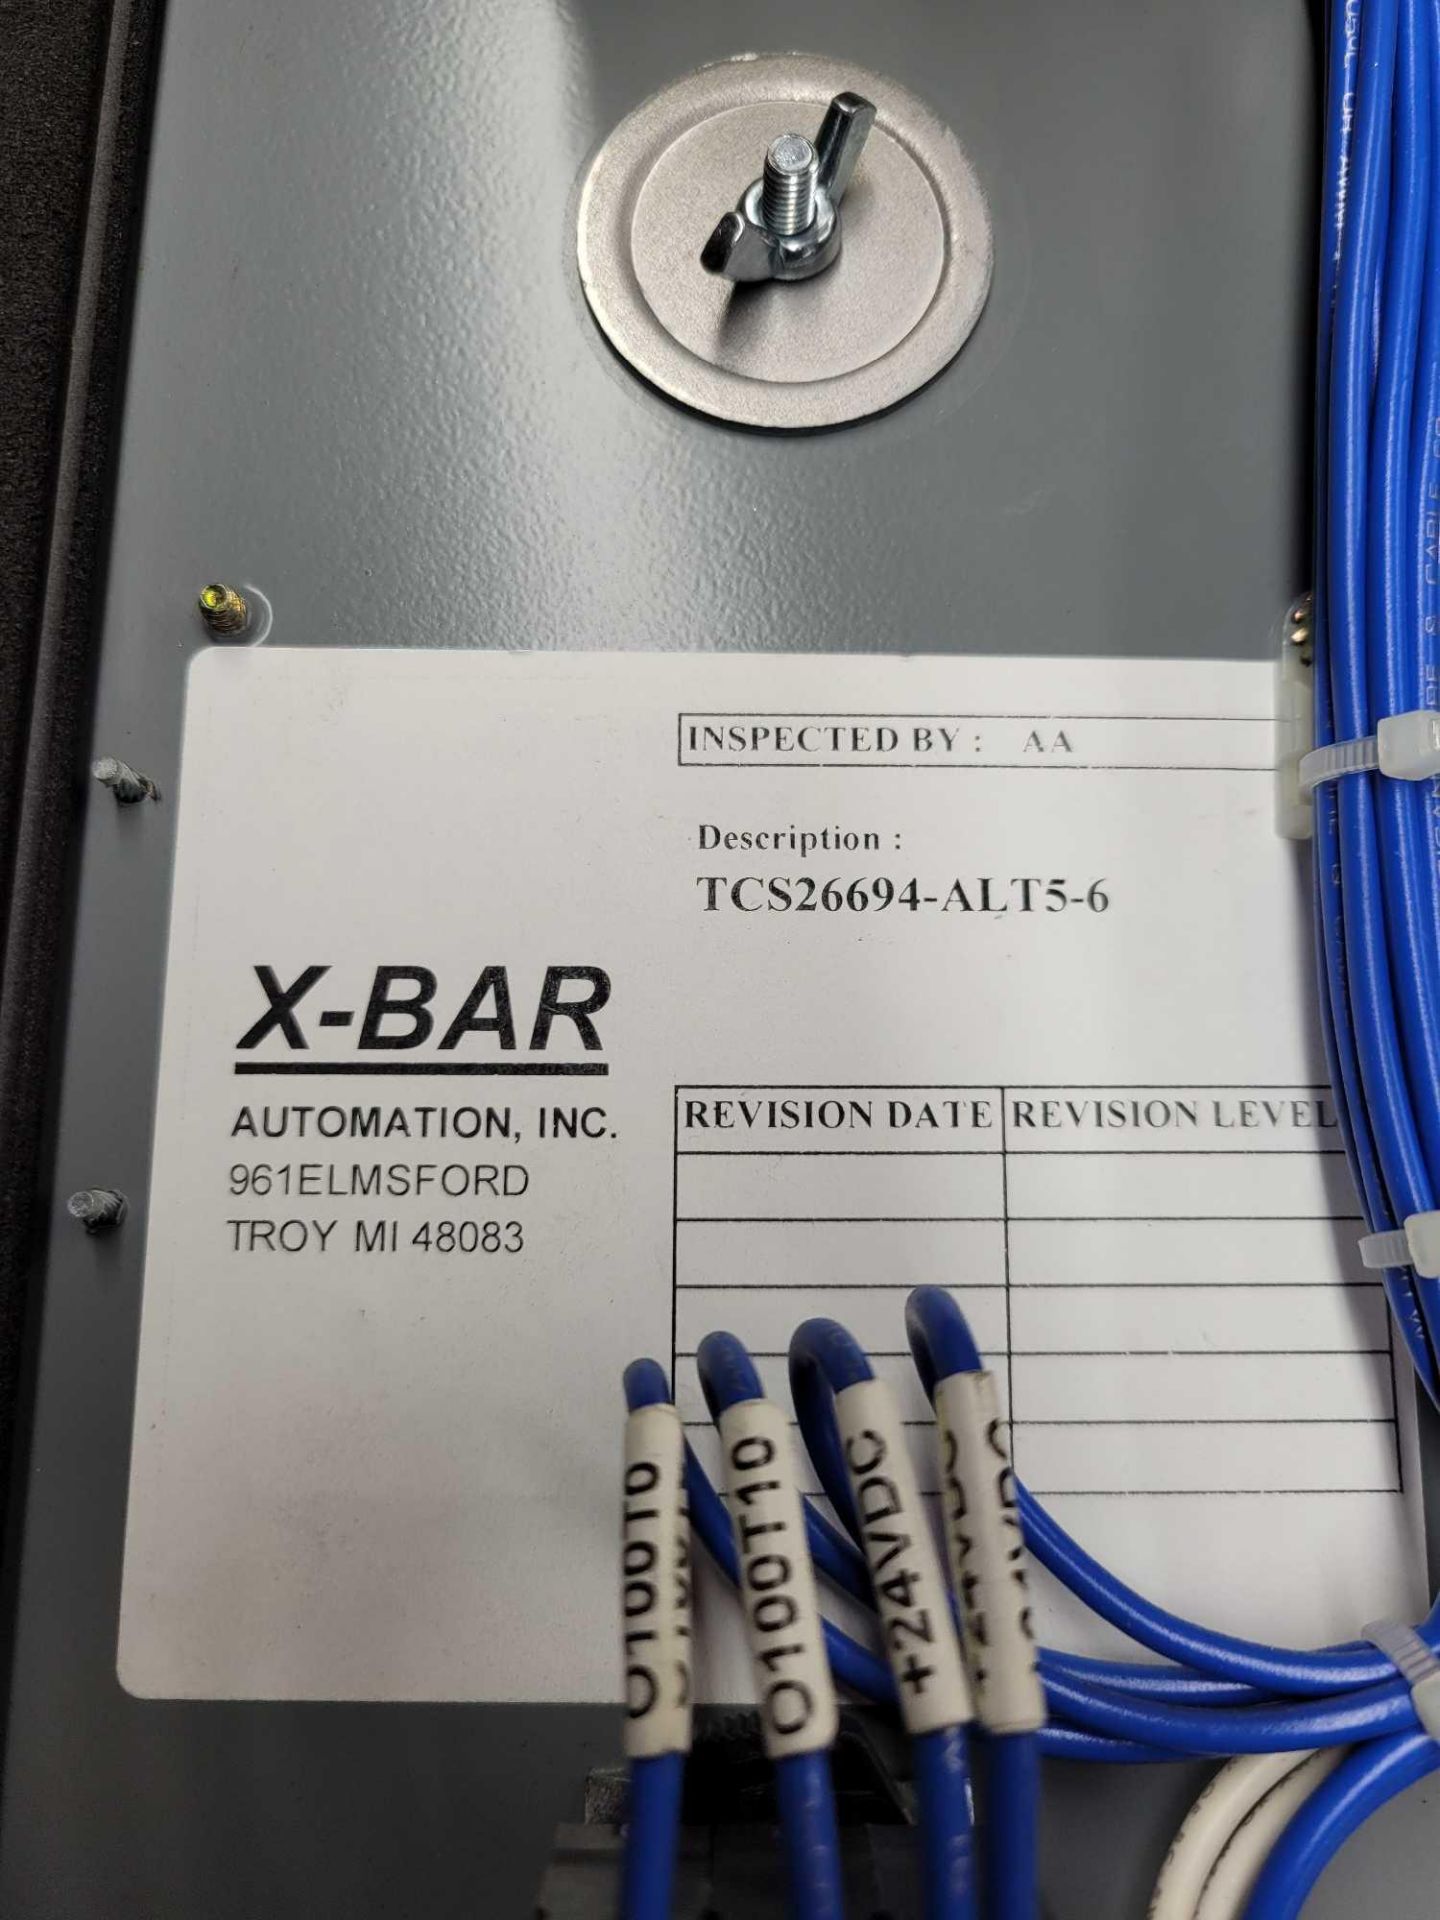 X-BAR AUTOMATION EC-4013RW / Reworked Entrance Gate Box  /  Lot Weight: 37.4 lbs - Image 13 of 13